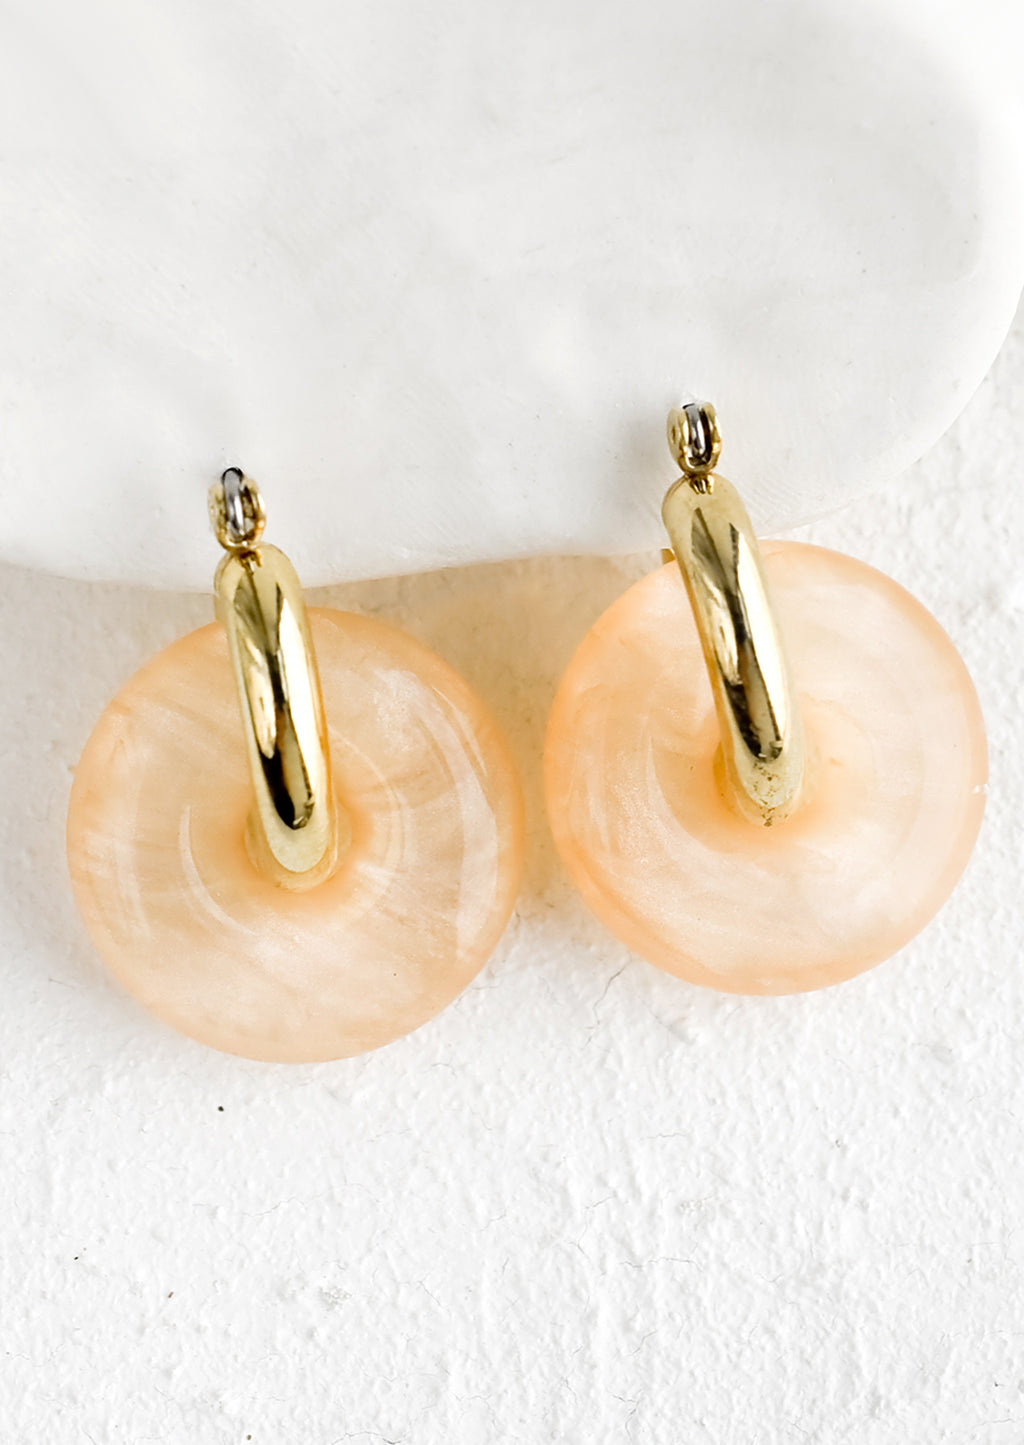 Peach: A pair of peach resin donut shaped charms on gold hoop earrings.